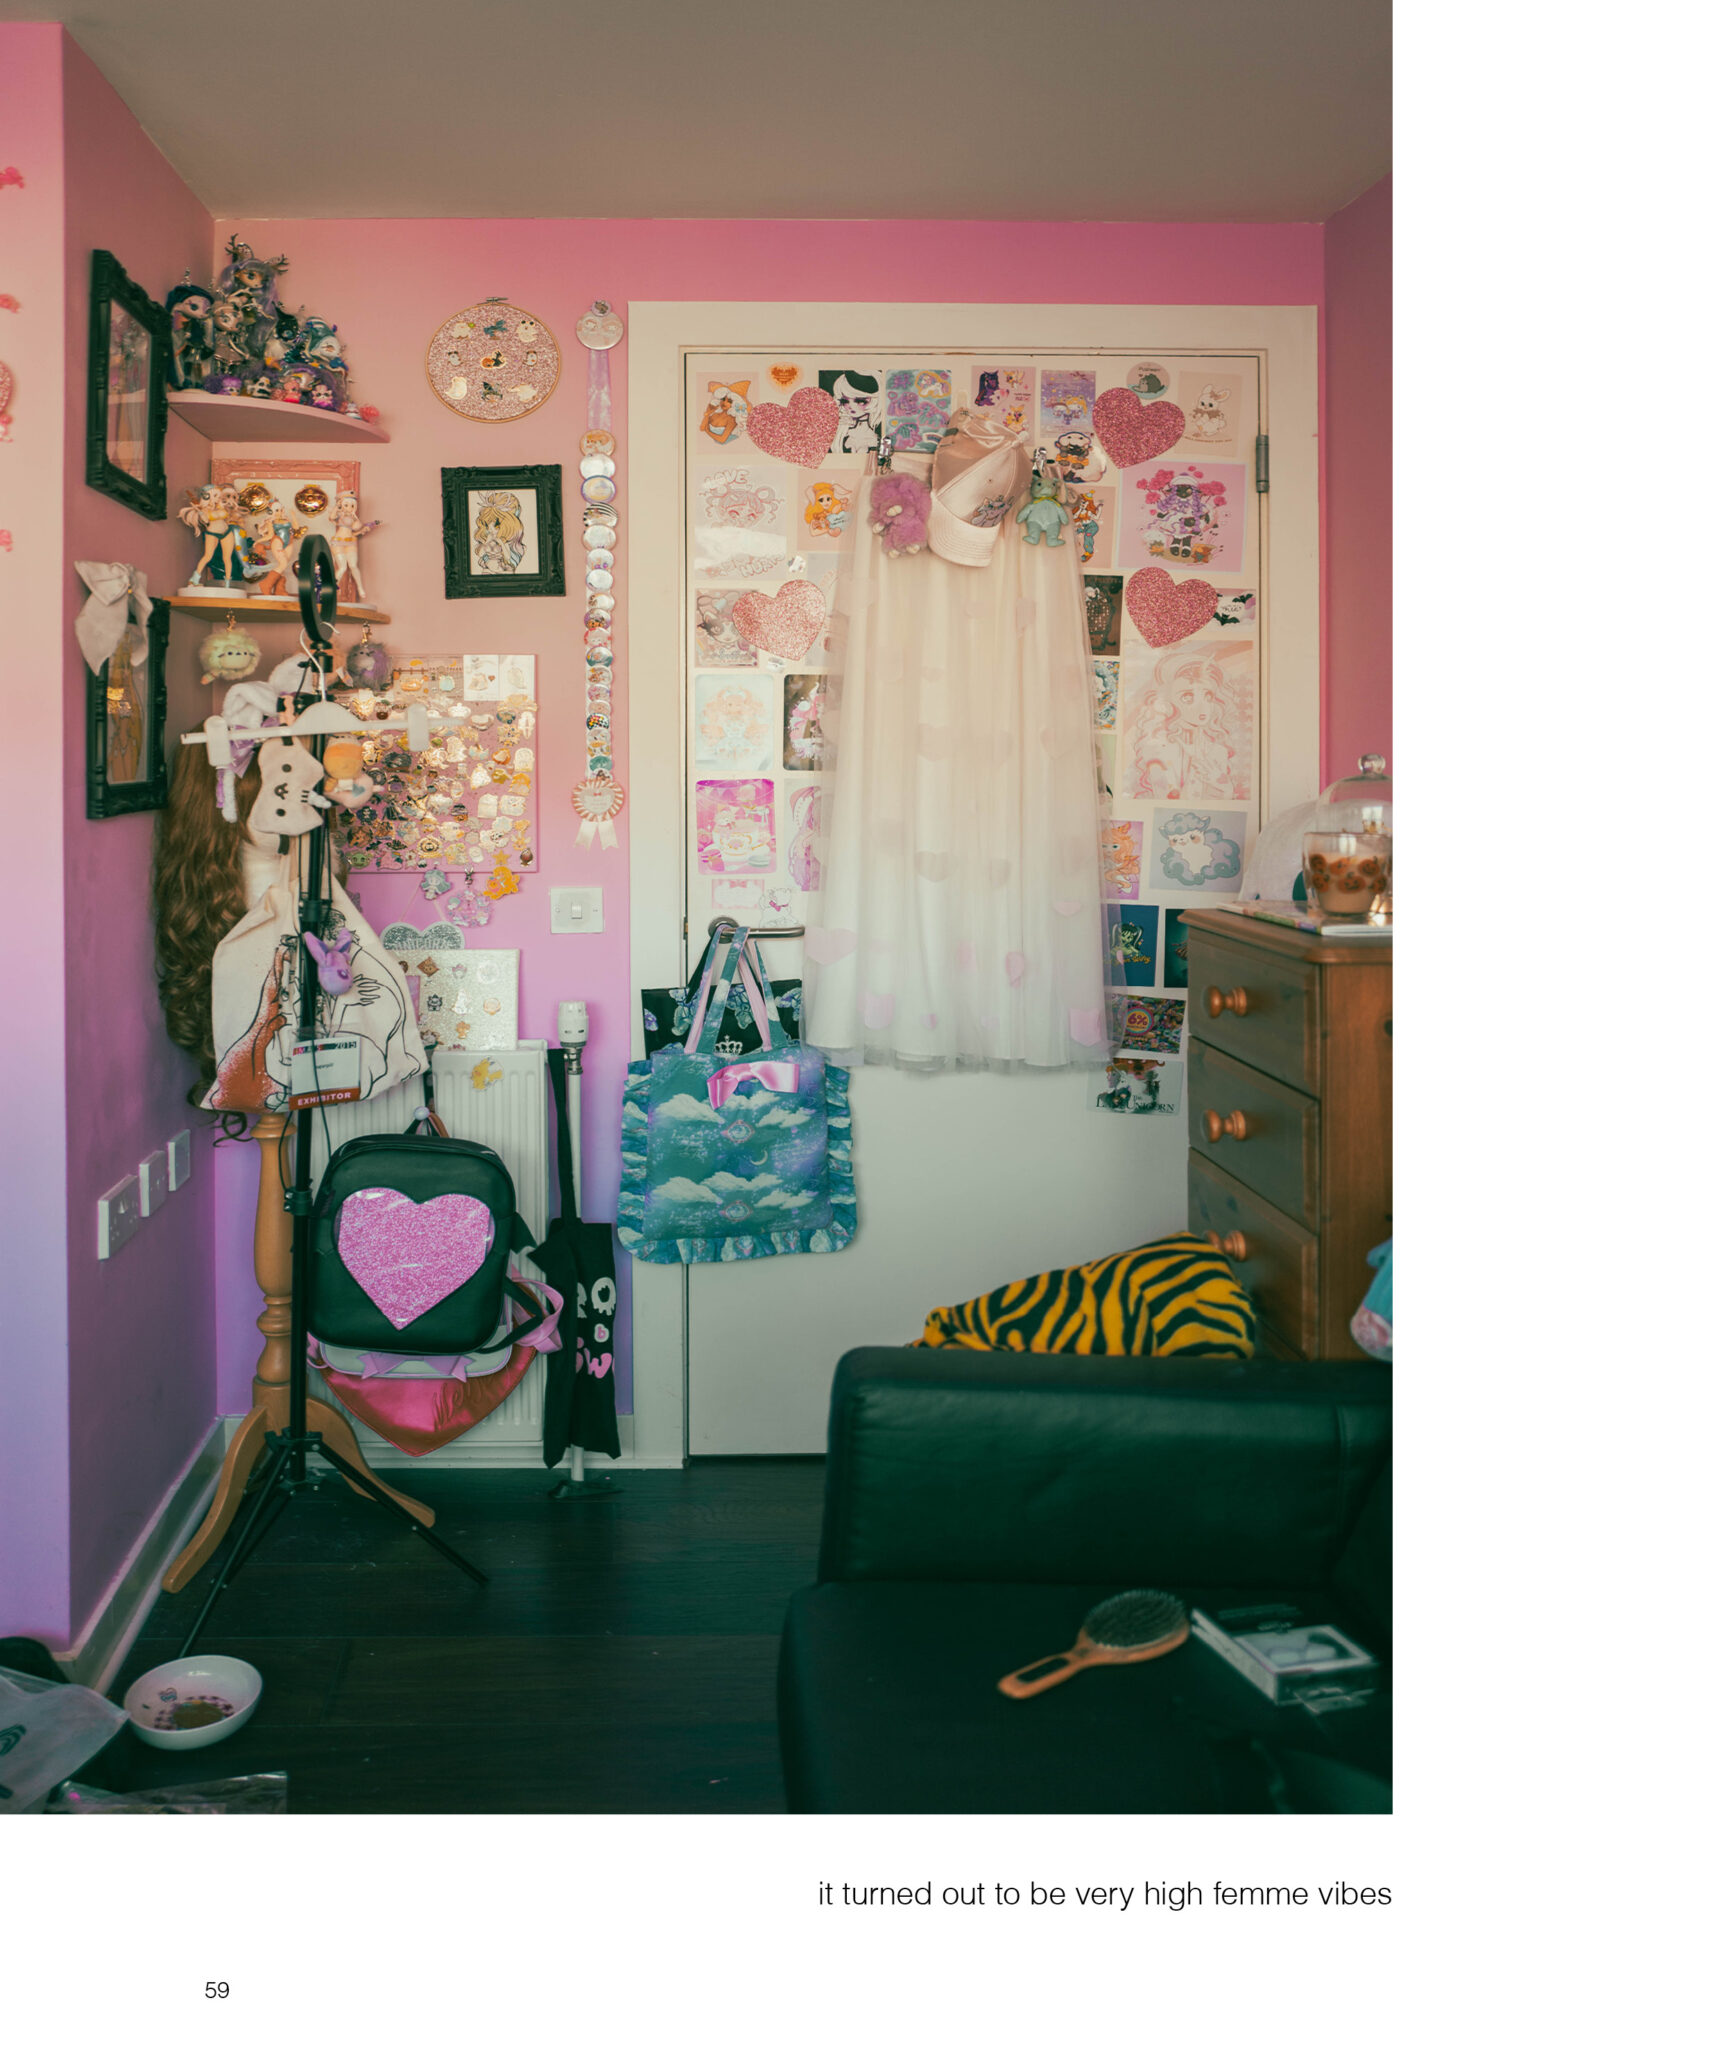 A highly femme room with pink walls and a white door with love hearts